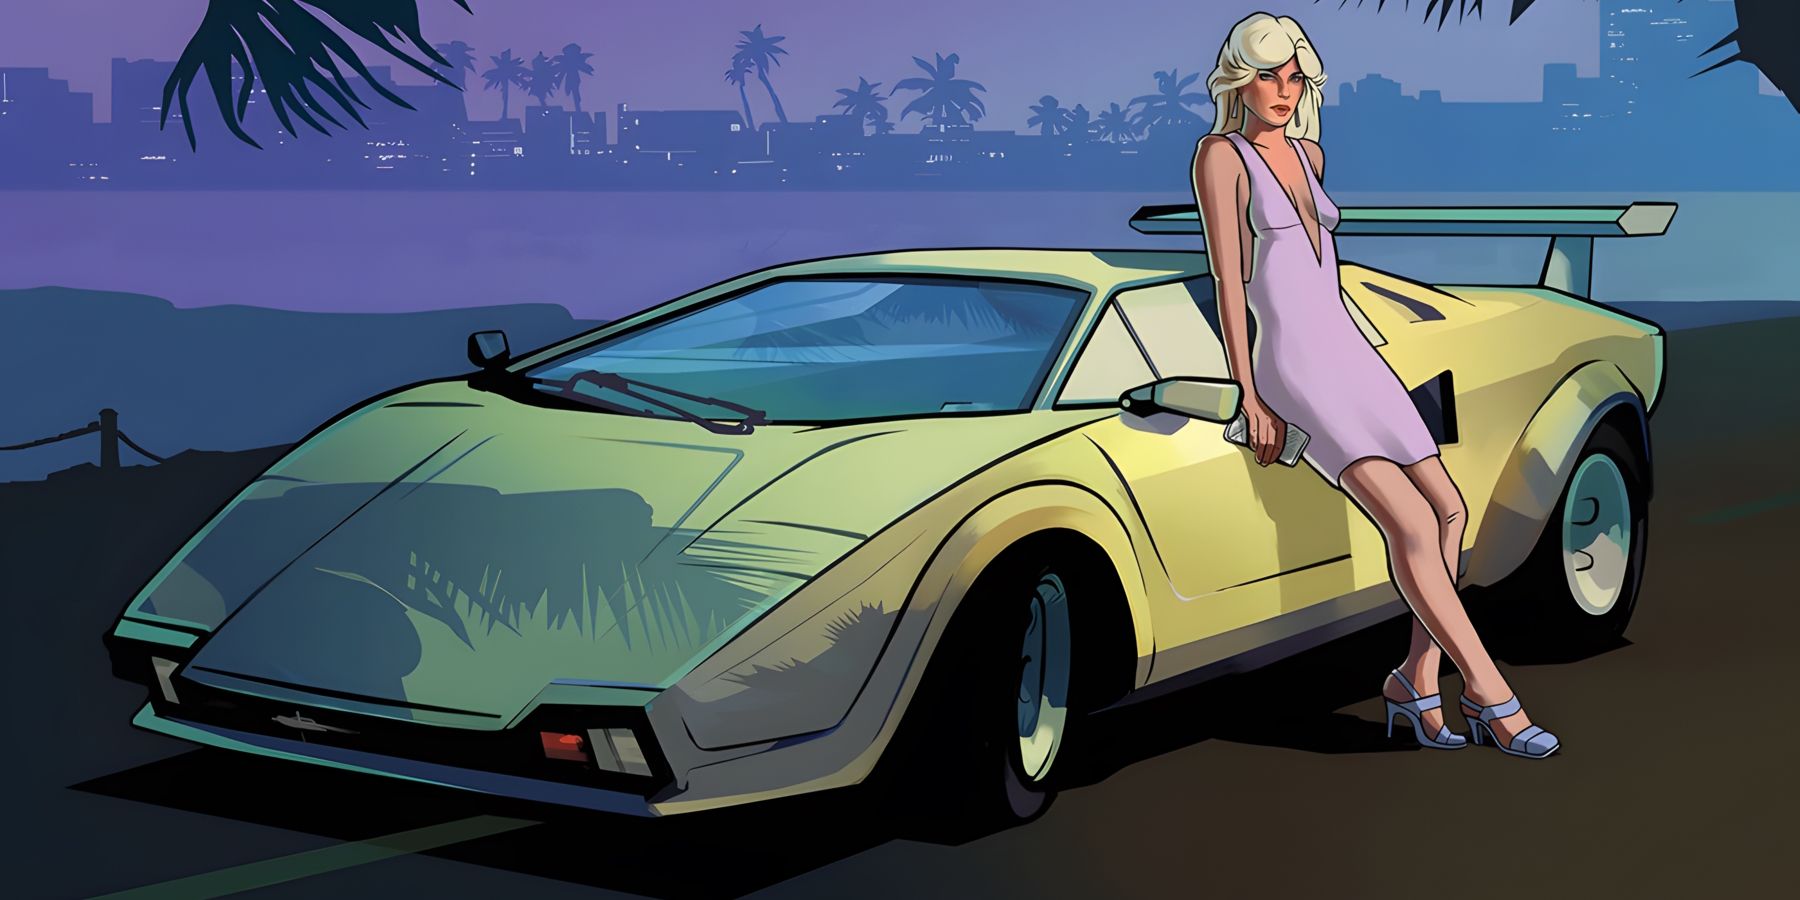 Grand Theft Auto: Vice City Stories promo art with Infernus and girl